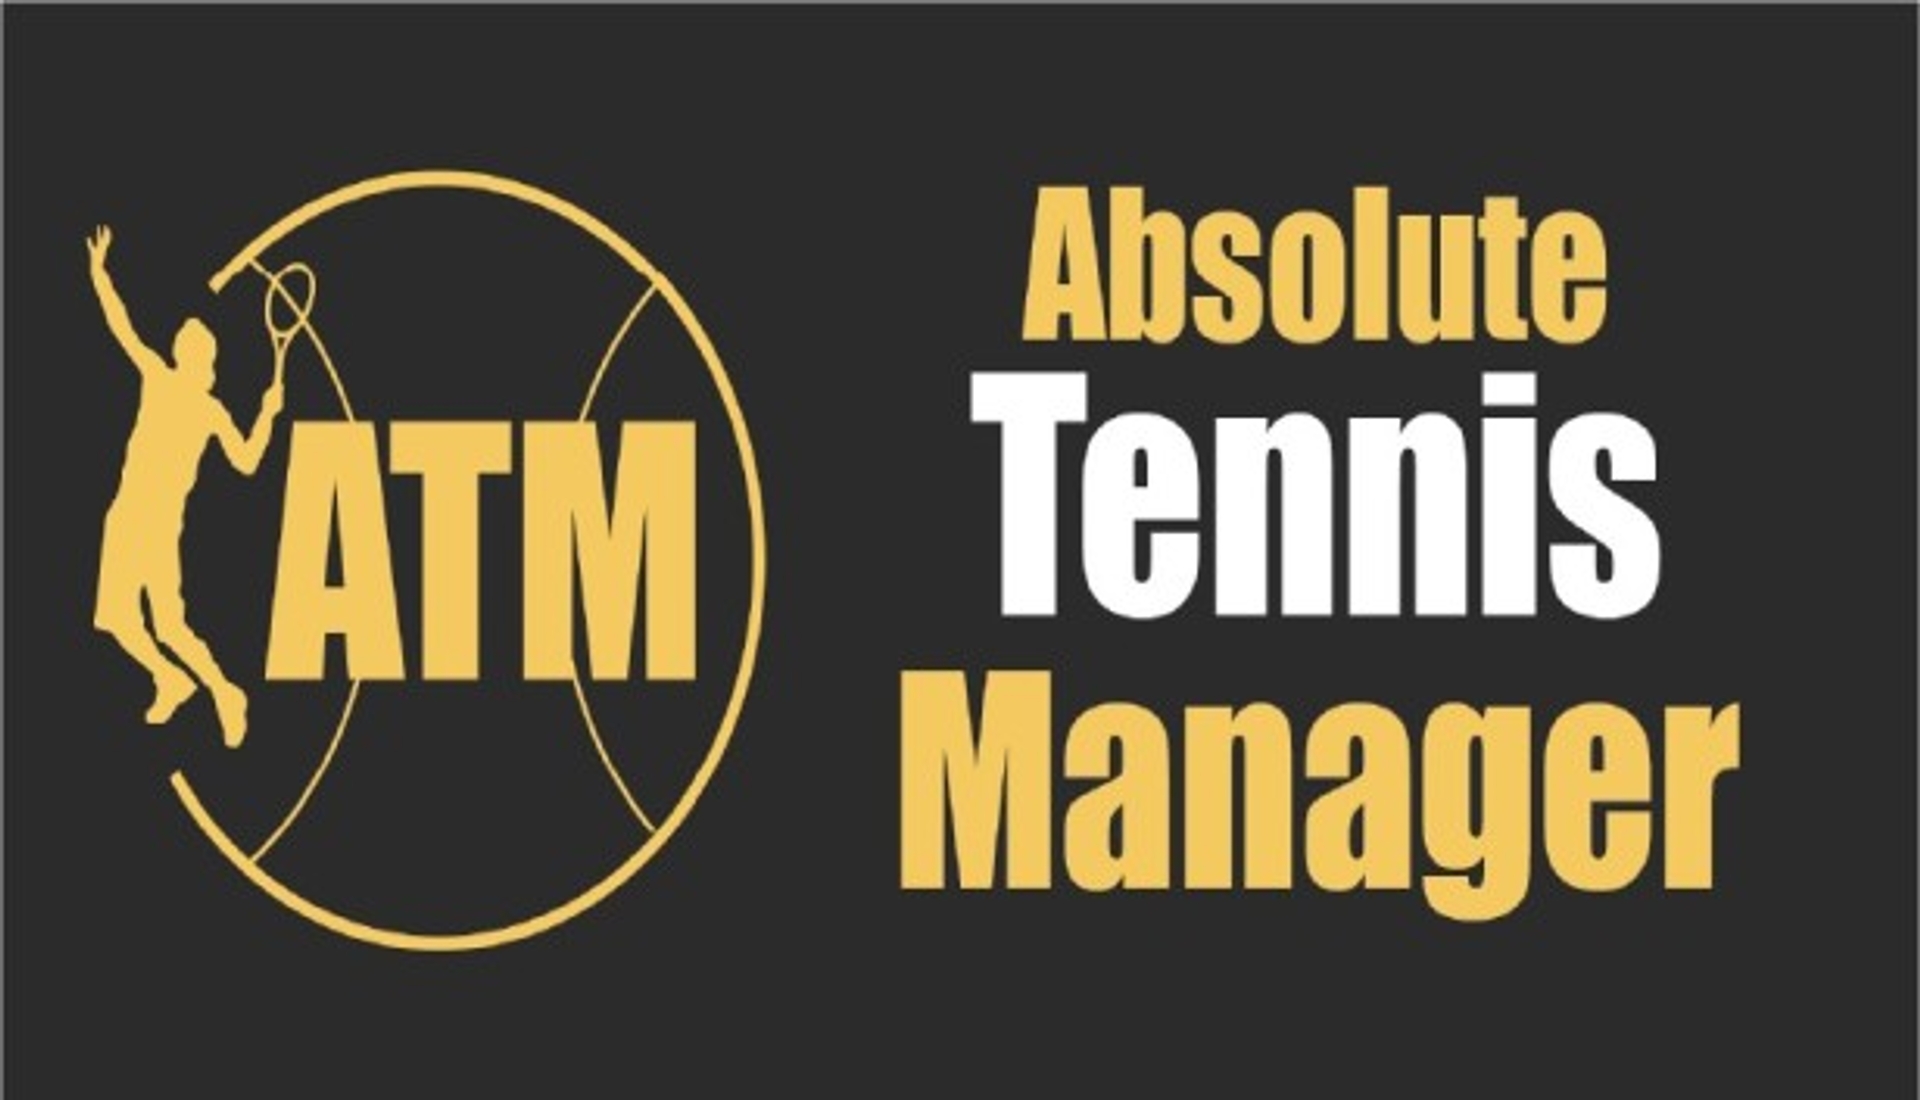 Absolute name. Absolute Tennis Manager.